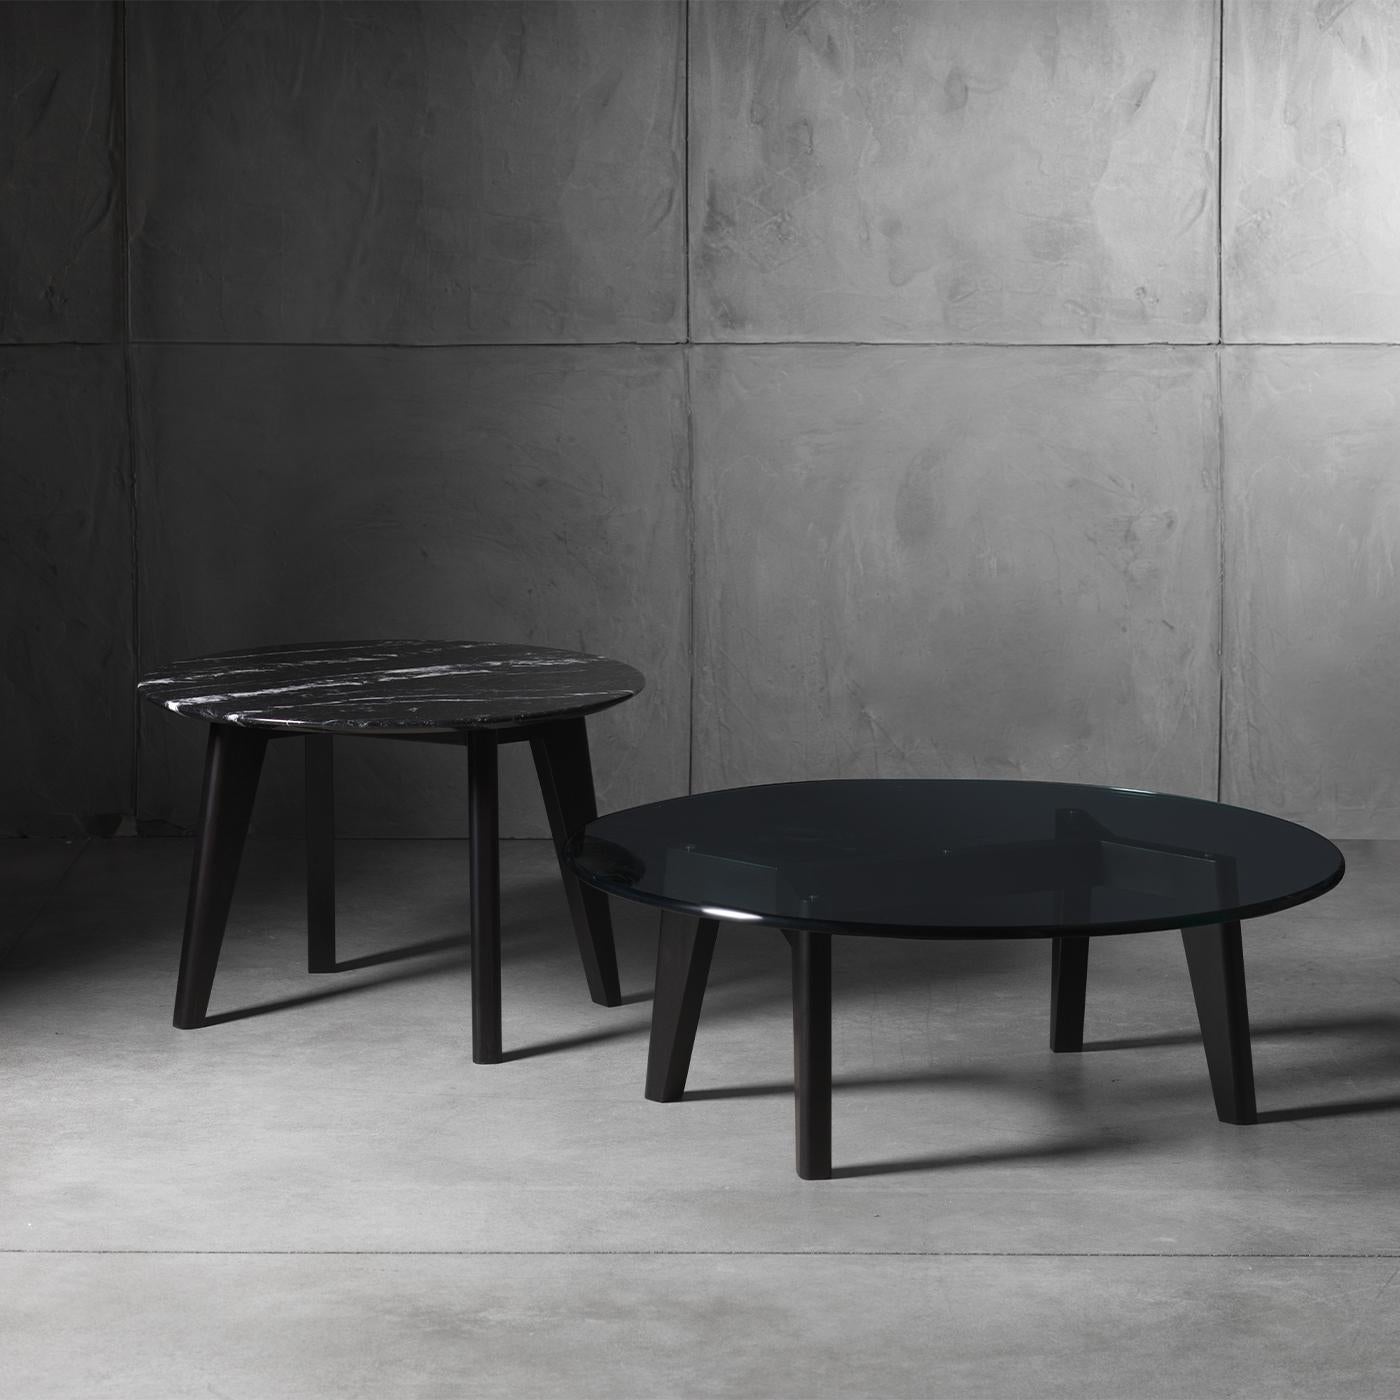 Made from a black, wooden base with a Nero Marquina marble top, this coffee table adds a striking touch to any environment. Bold yet minimal, the veining of the marble adds a dramatic pop of contrasting white. As the veining of each piece of marble